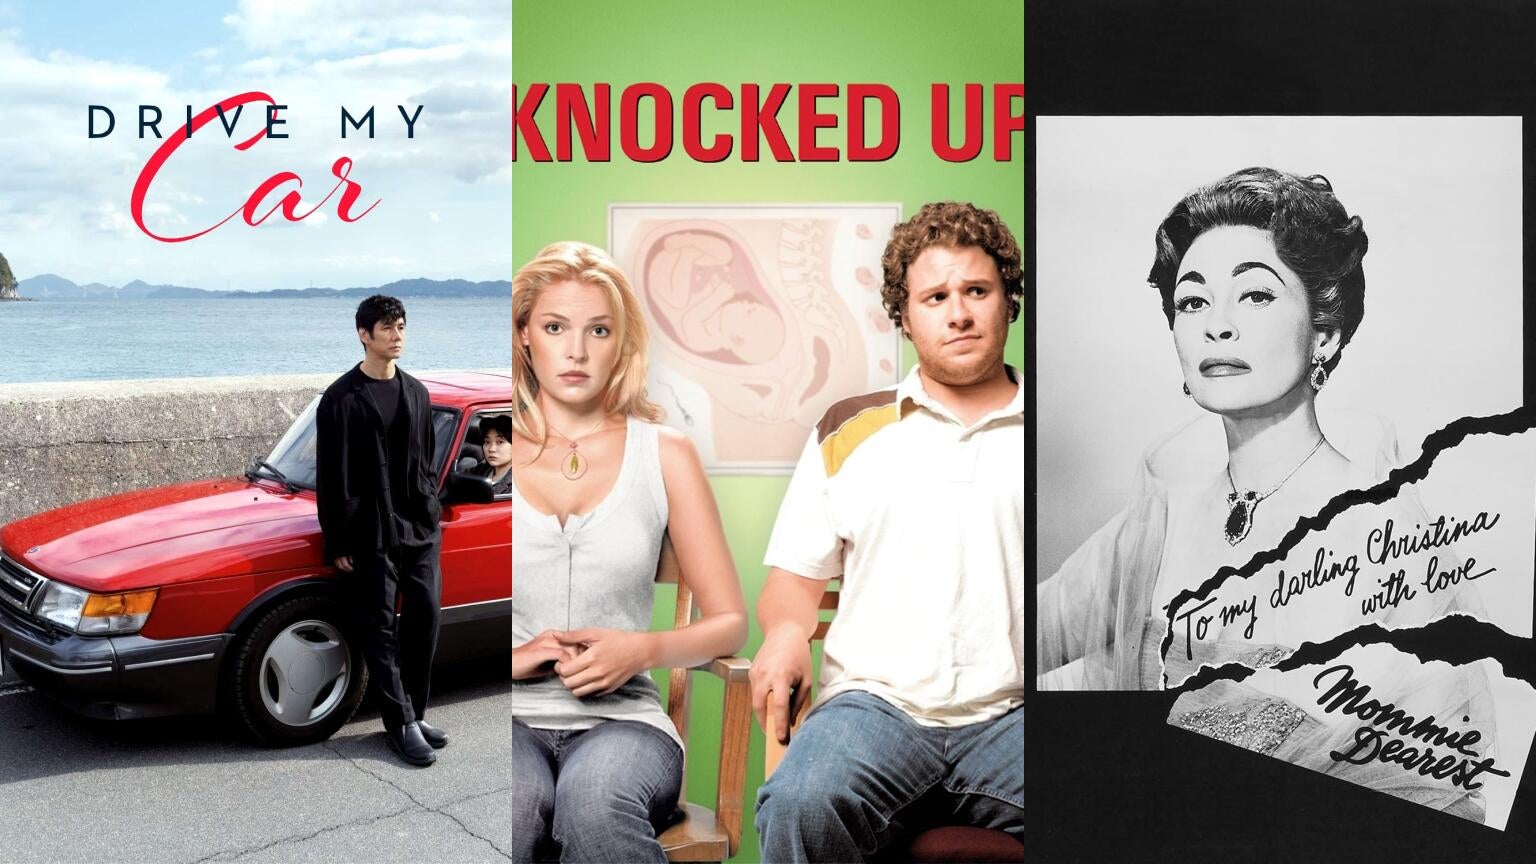 Movie posters for "Drive My Car," "Knocked Up," and "Mommie Dearest"